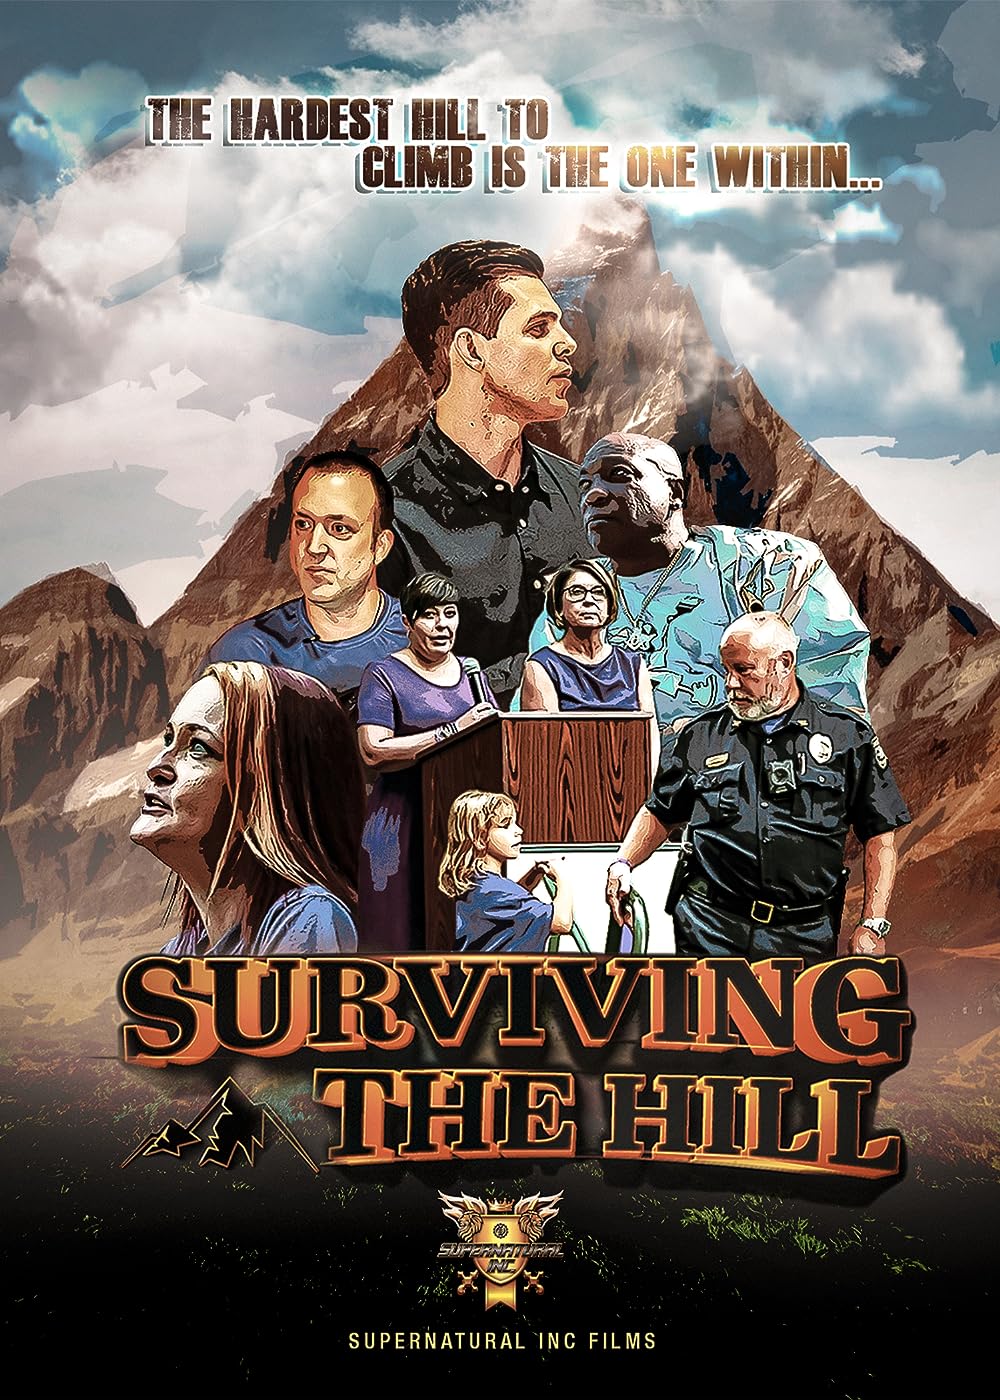 Movie poster with several individuals including a man looking into the distance, two women at a podium, a man in a police uniform, and a woman with long hair looking upward all against a hill and sky